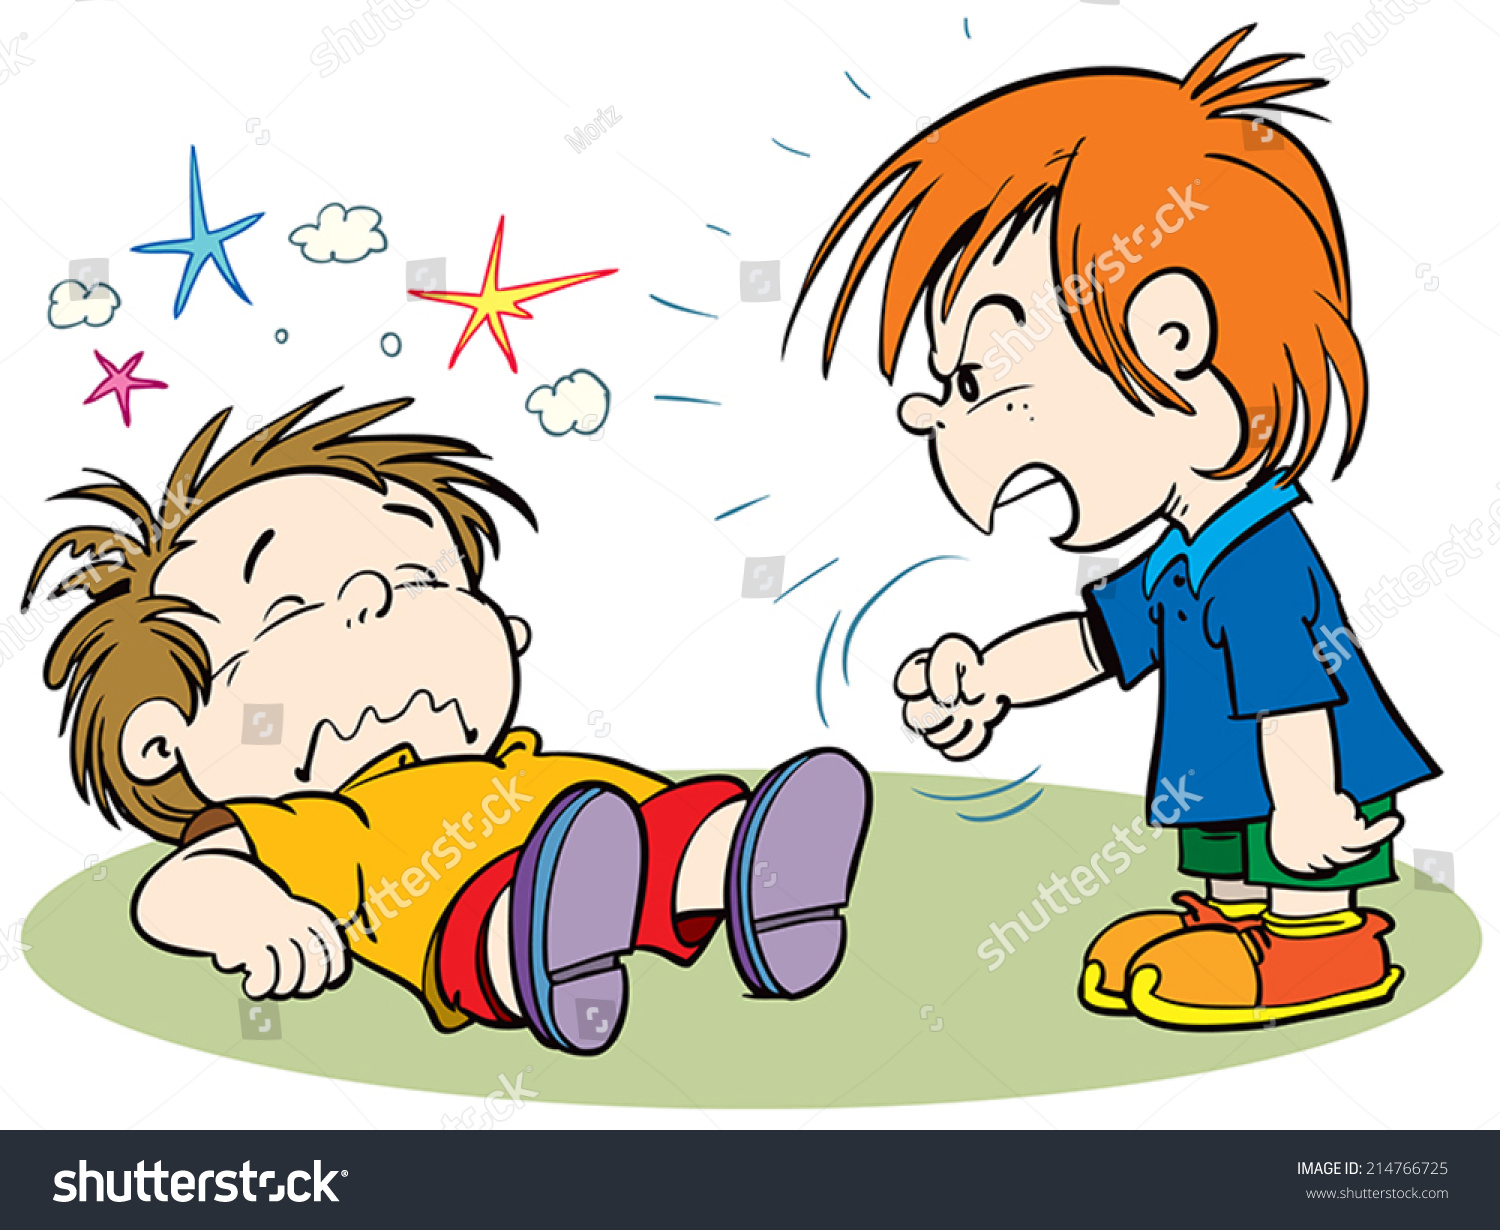 boy and girl fighting clipart - photo #49